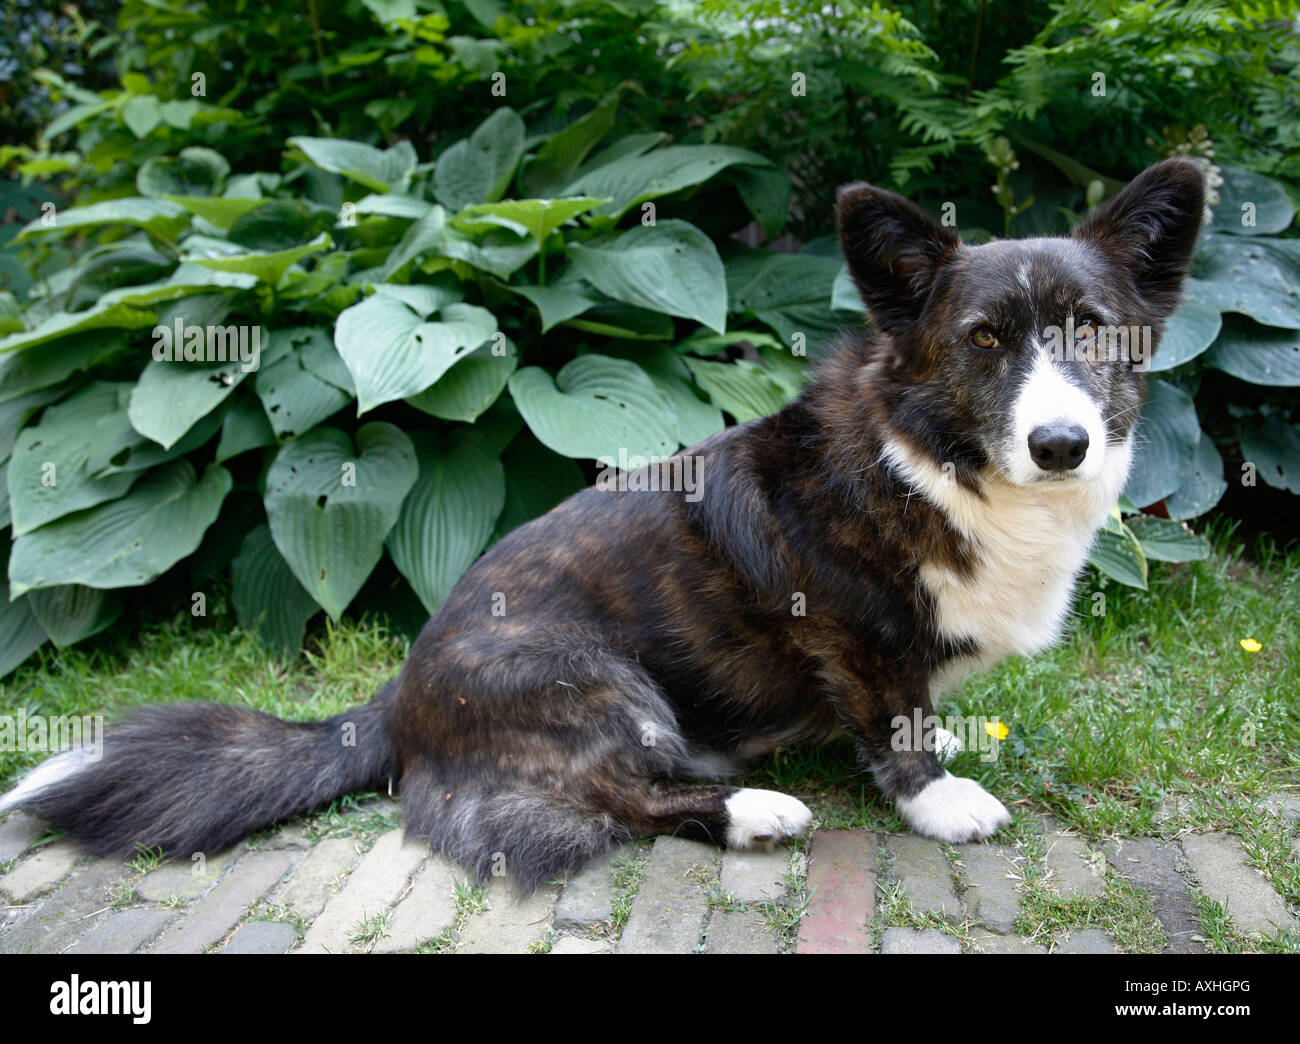 Welsh Corgi cardigan dog in garden head in focus rest of image out of focus.  Dog is owned by photographer. Stock Photo